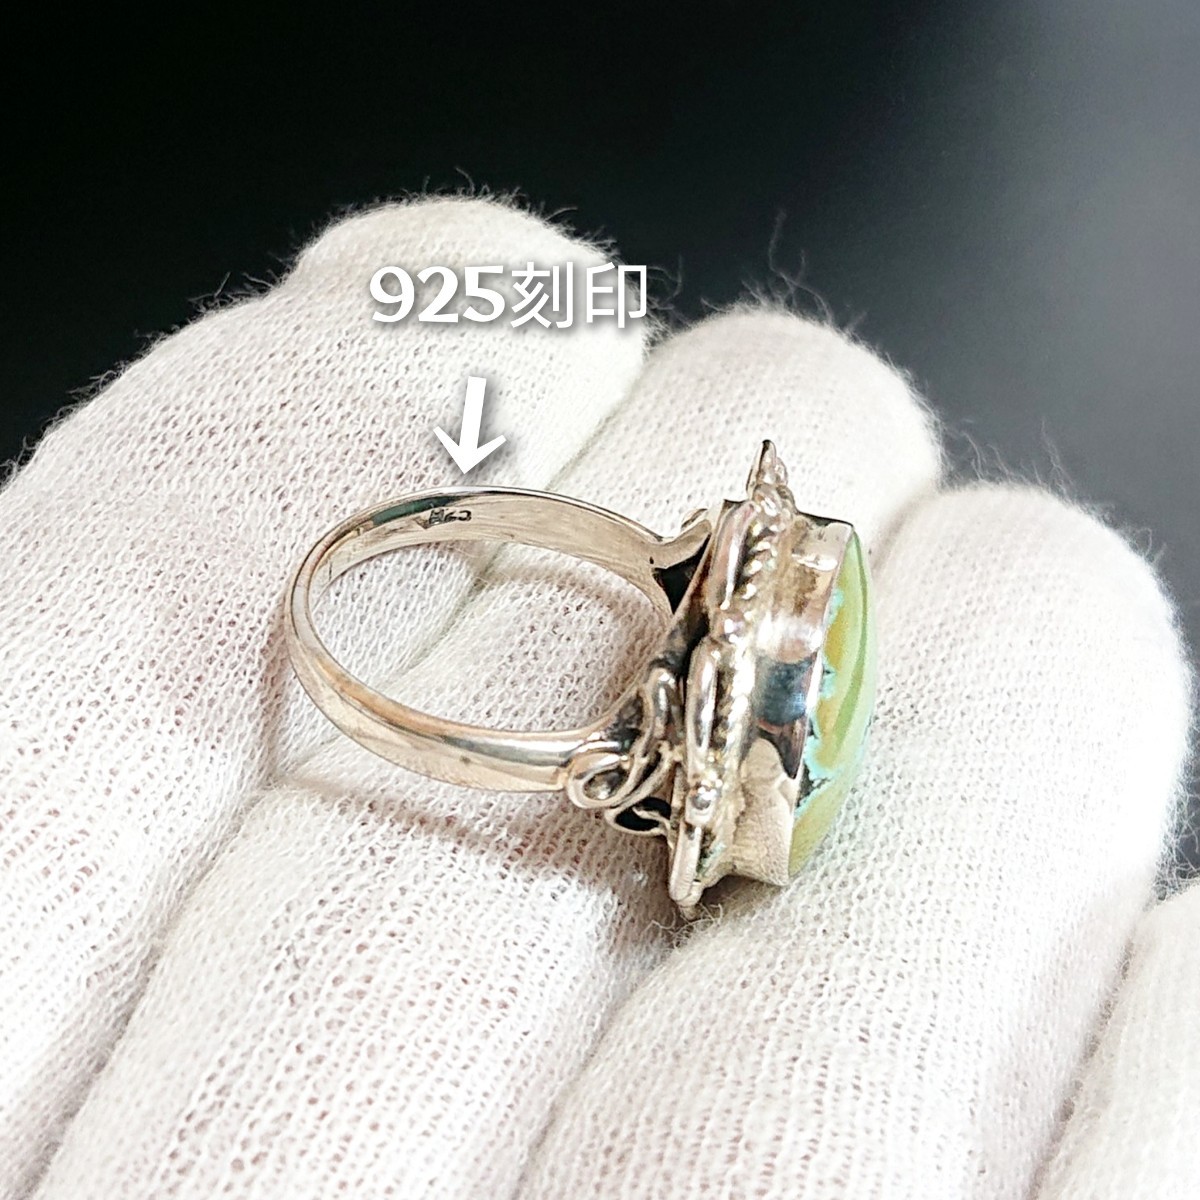 4935 SILVER925 turquoise ring 11 number silver 925 natural stone Indian jewelry Navajo navajo circle round green group sun SUN flower 